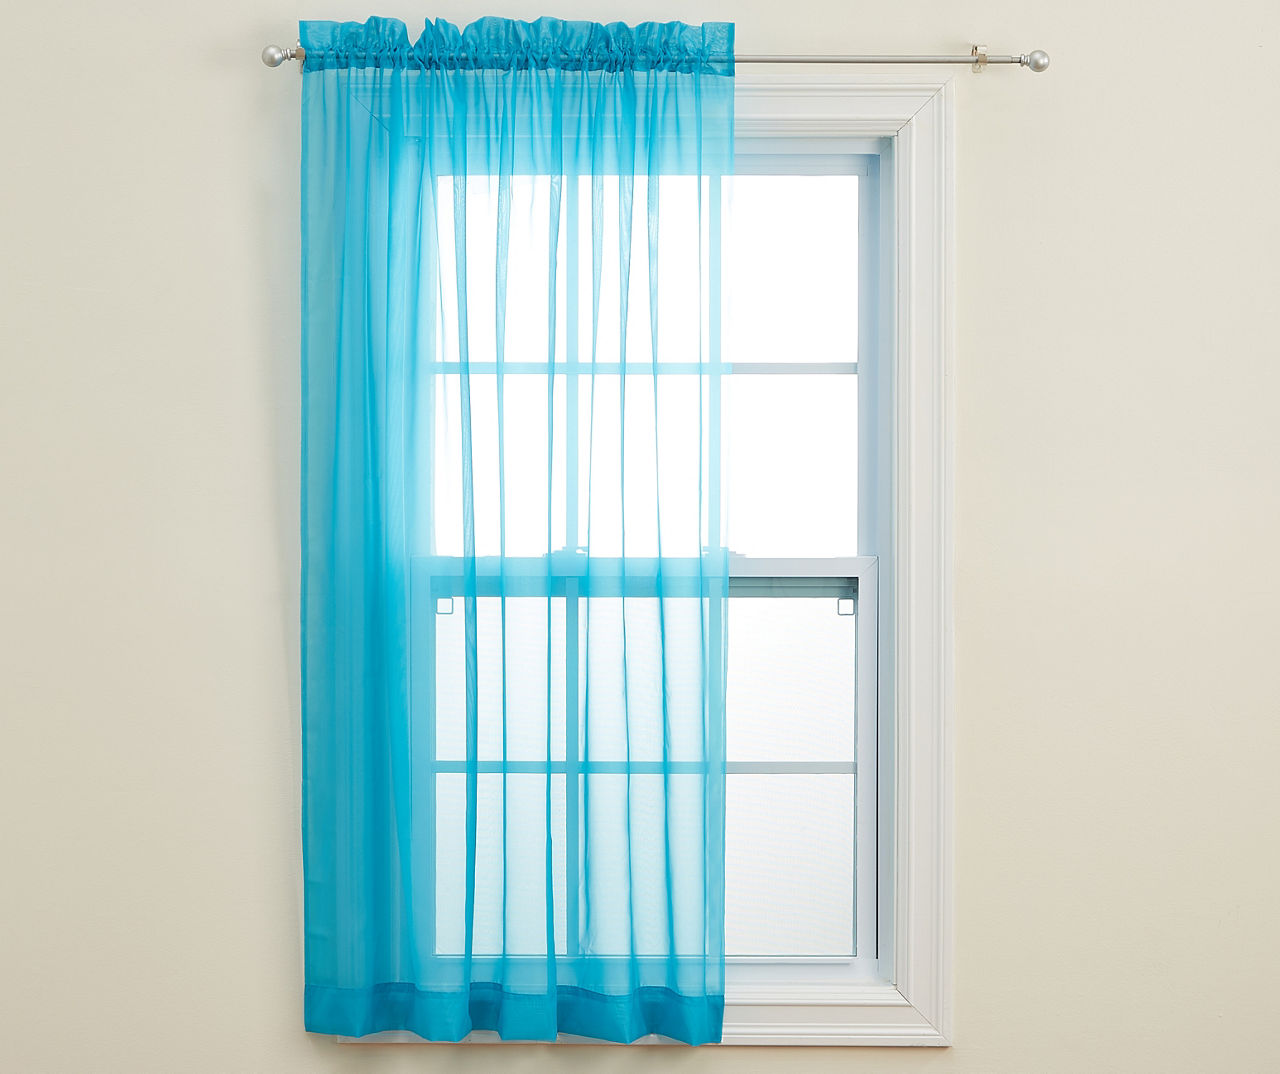 Turquoise Voile Sheer Curtain Panel, (63")